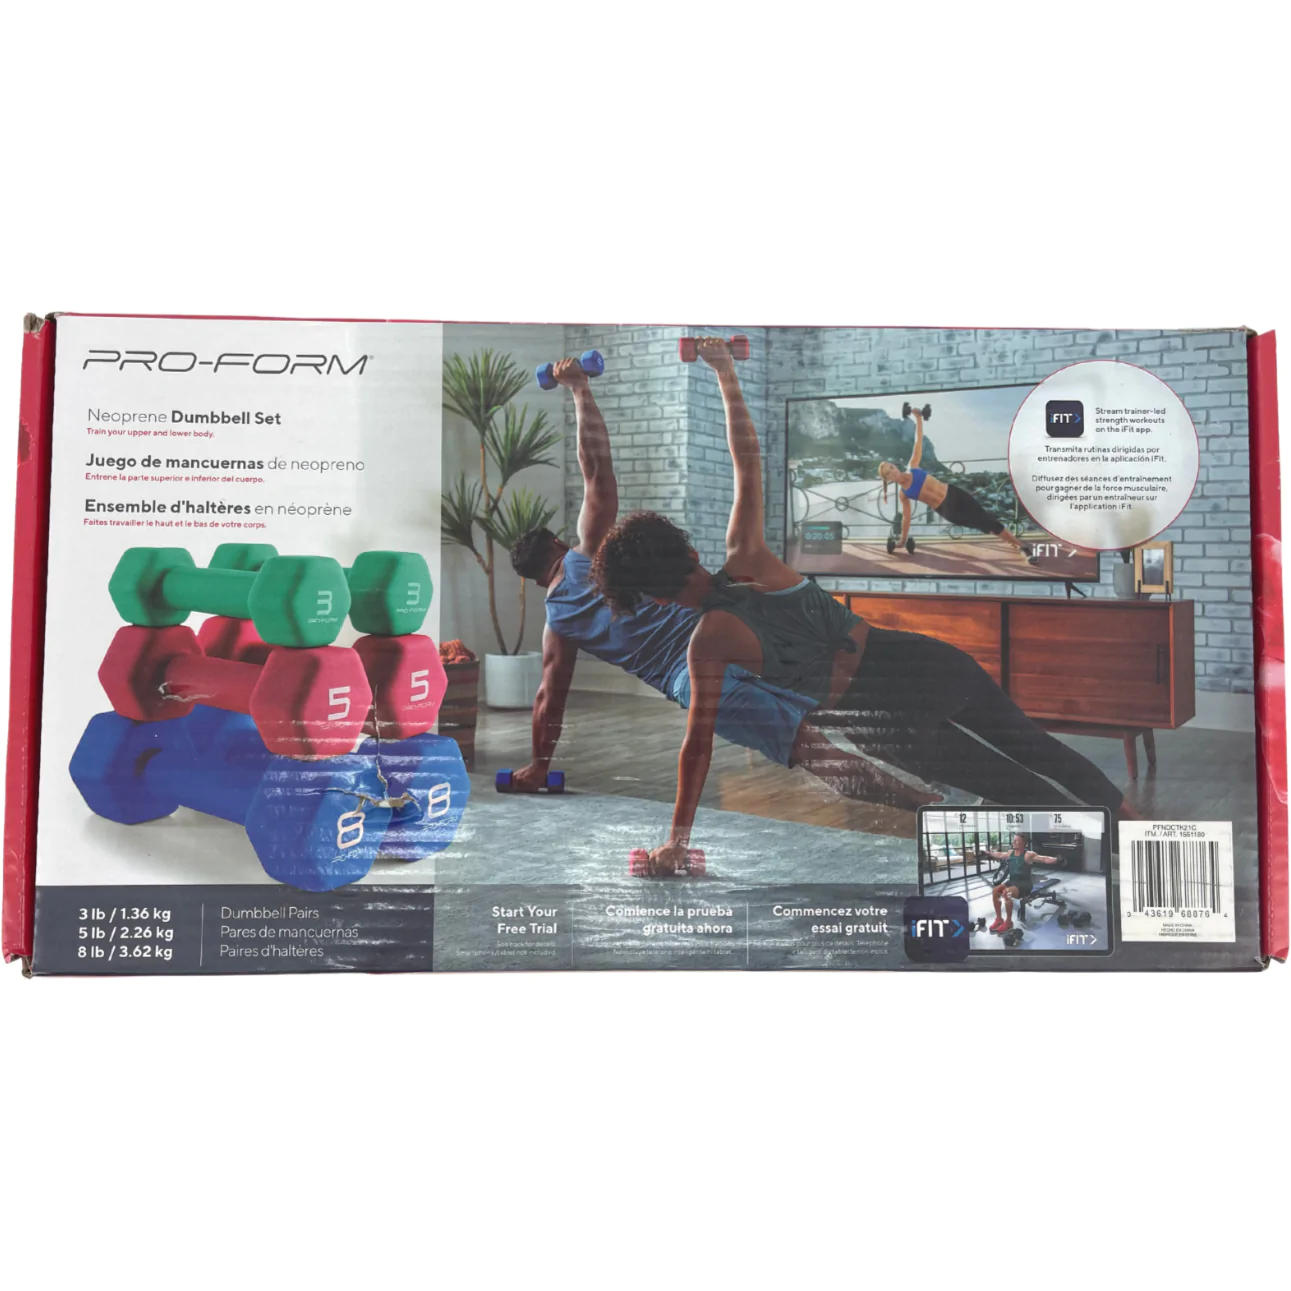 Pro-Form Neoprene Dumbbell Weight Set – CanadaWide Liquidations